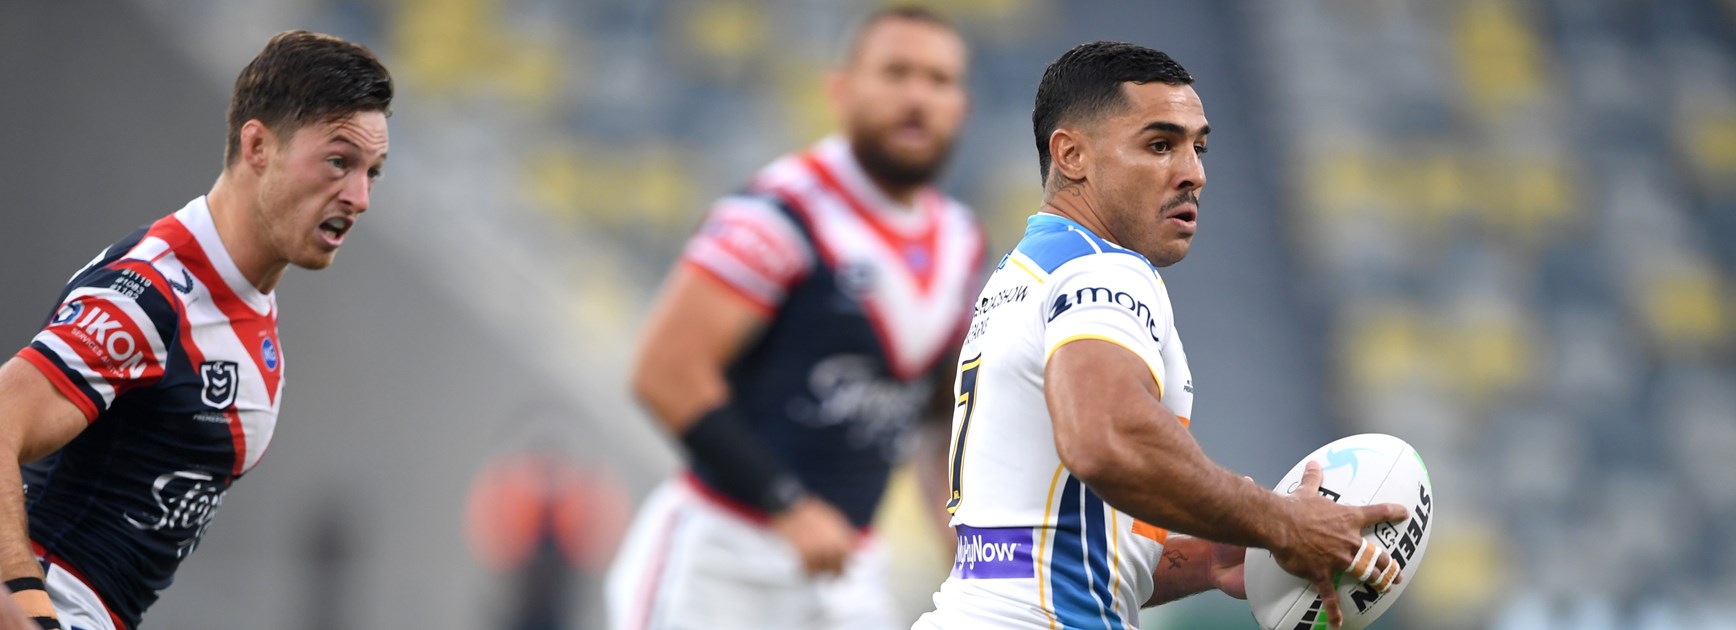 2021 Signings Tracker: Knights trio re-sign; Feagai twins extend